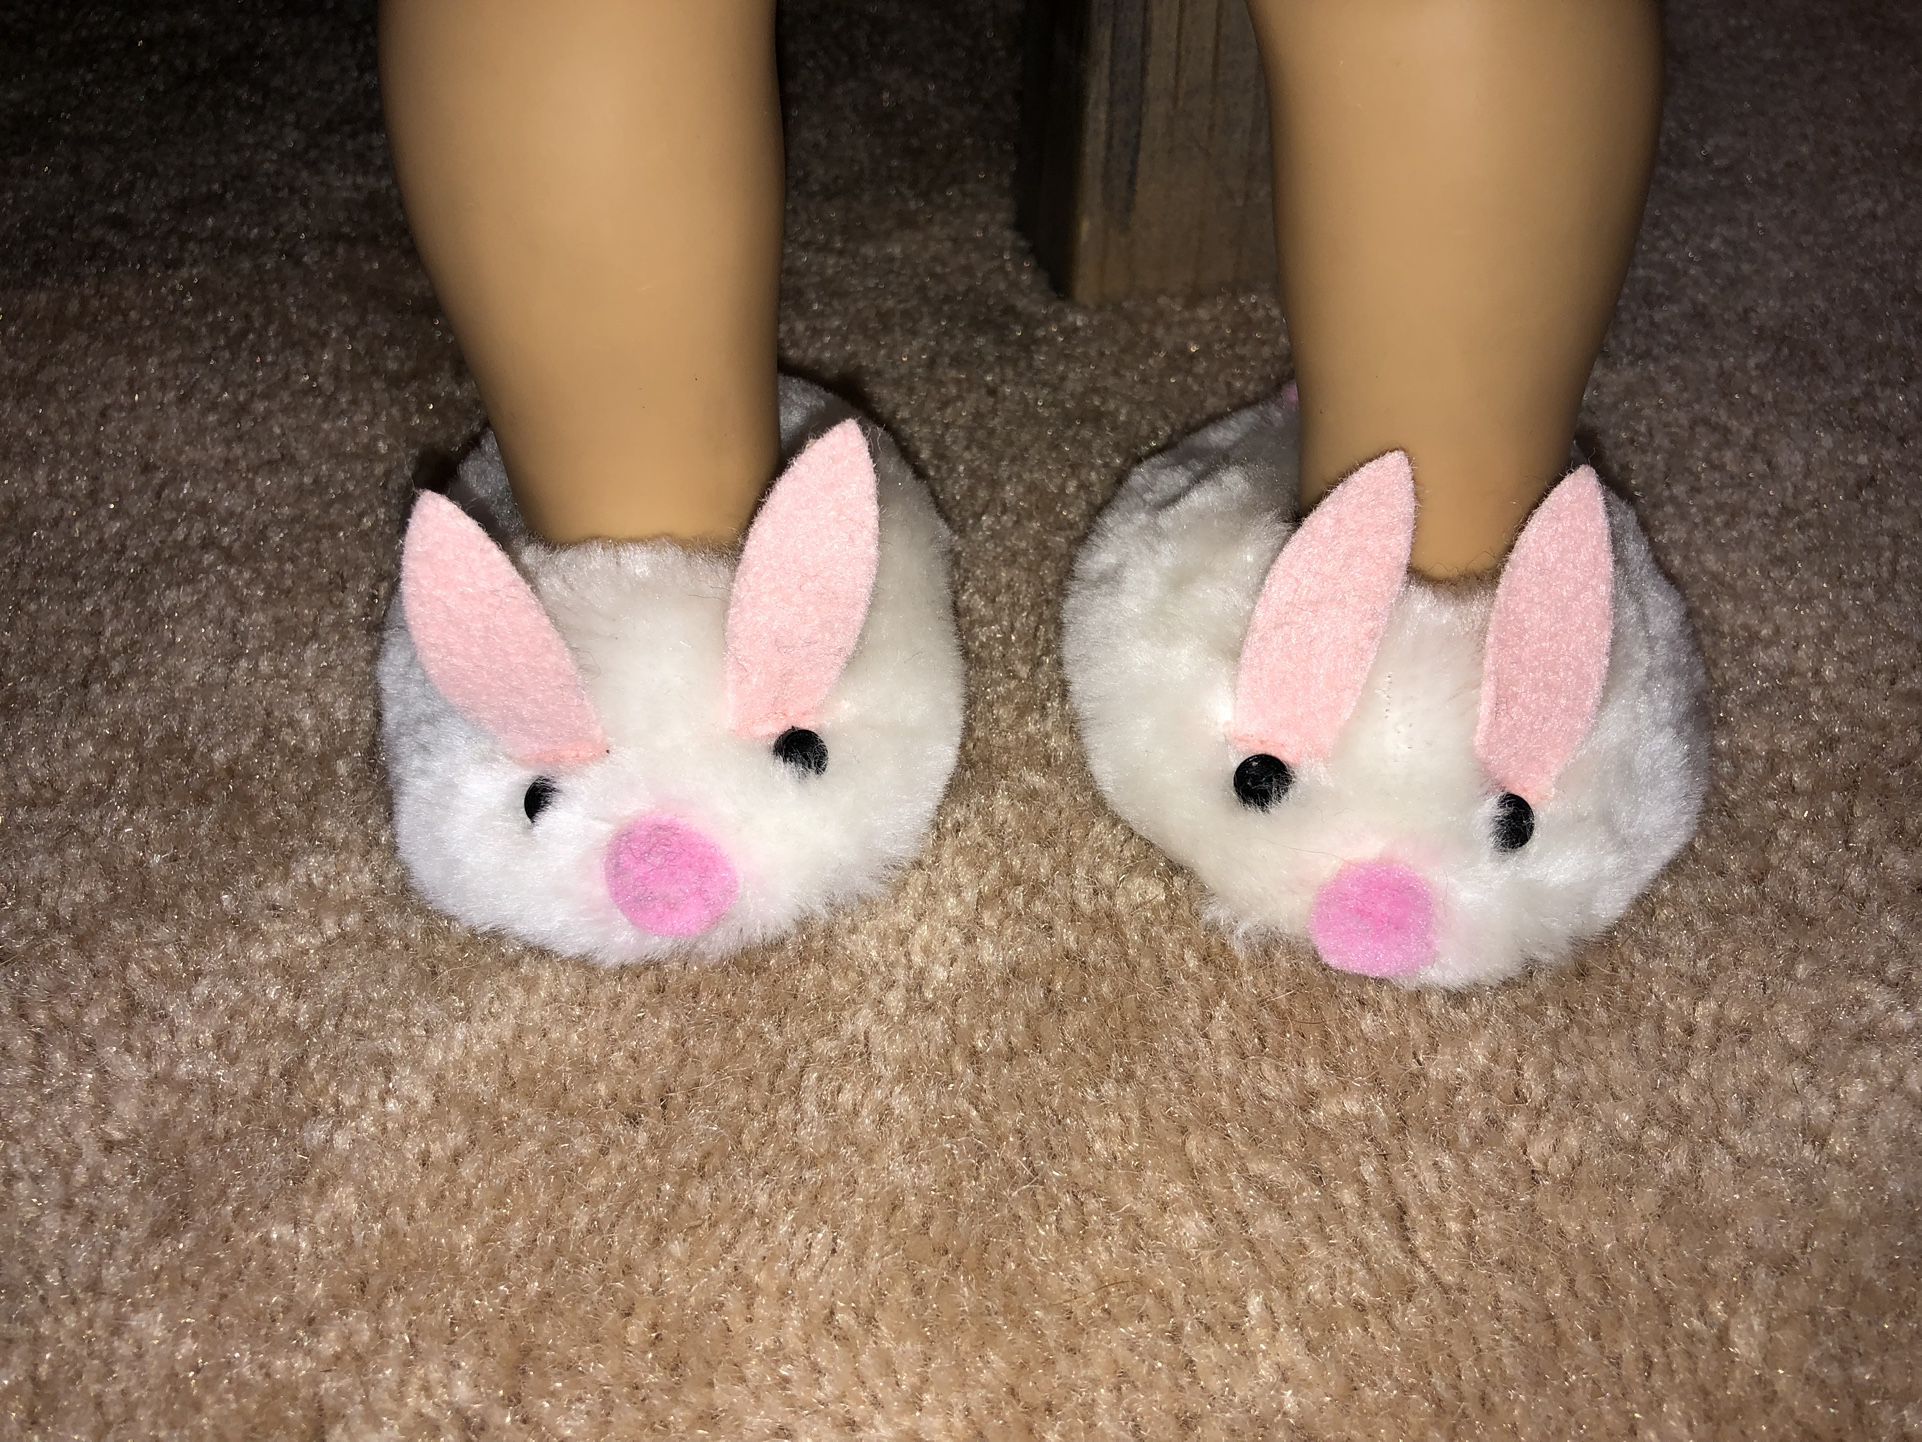 Doll Slippers 